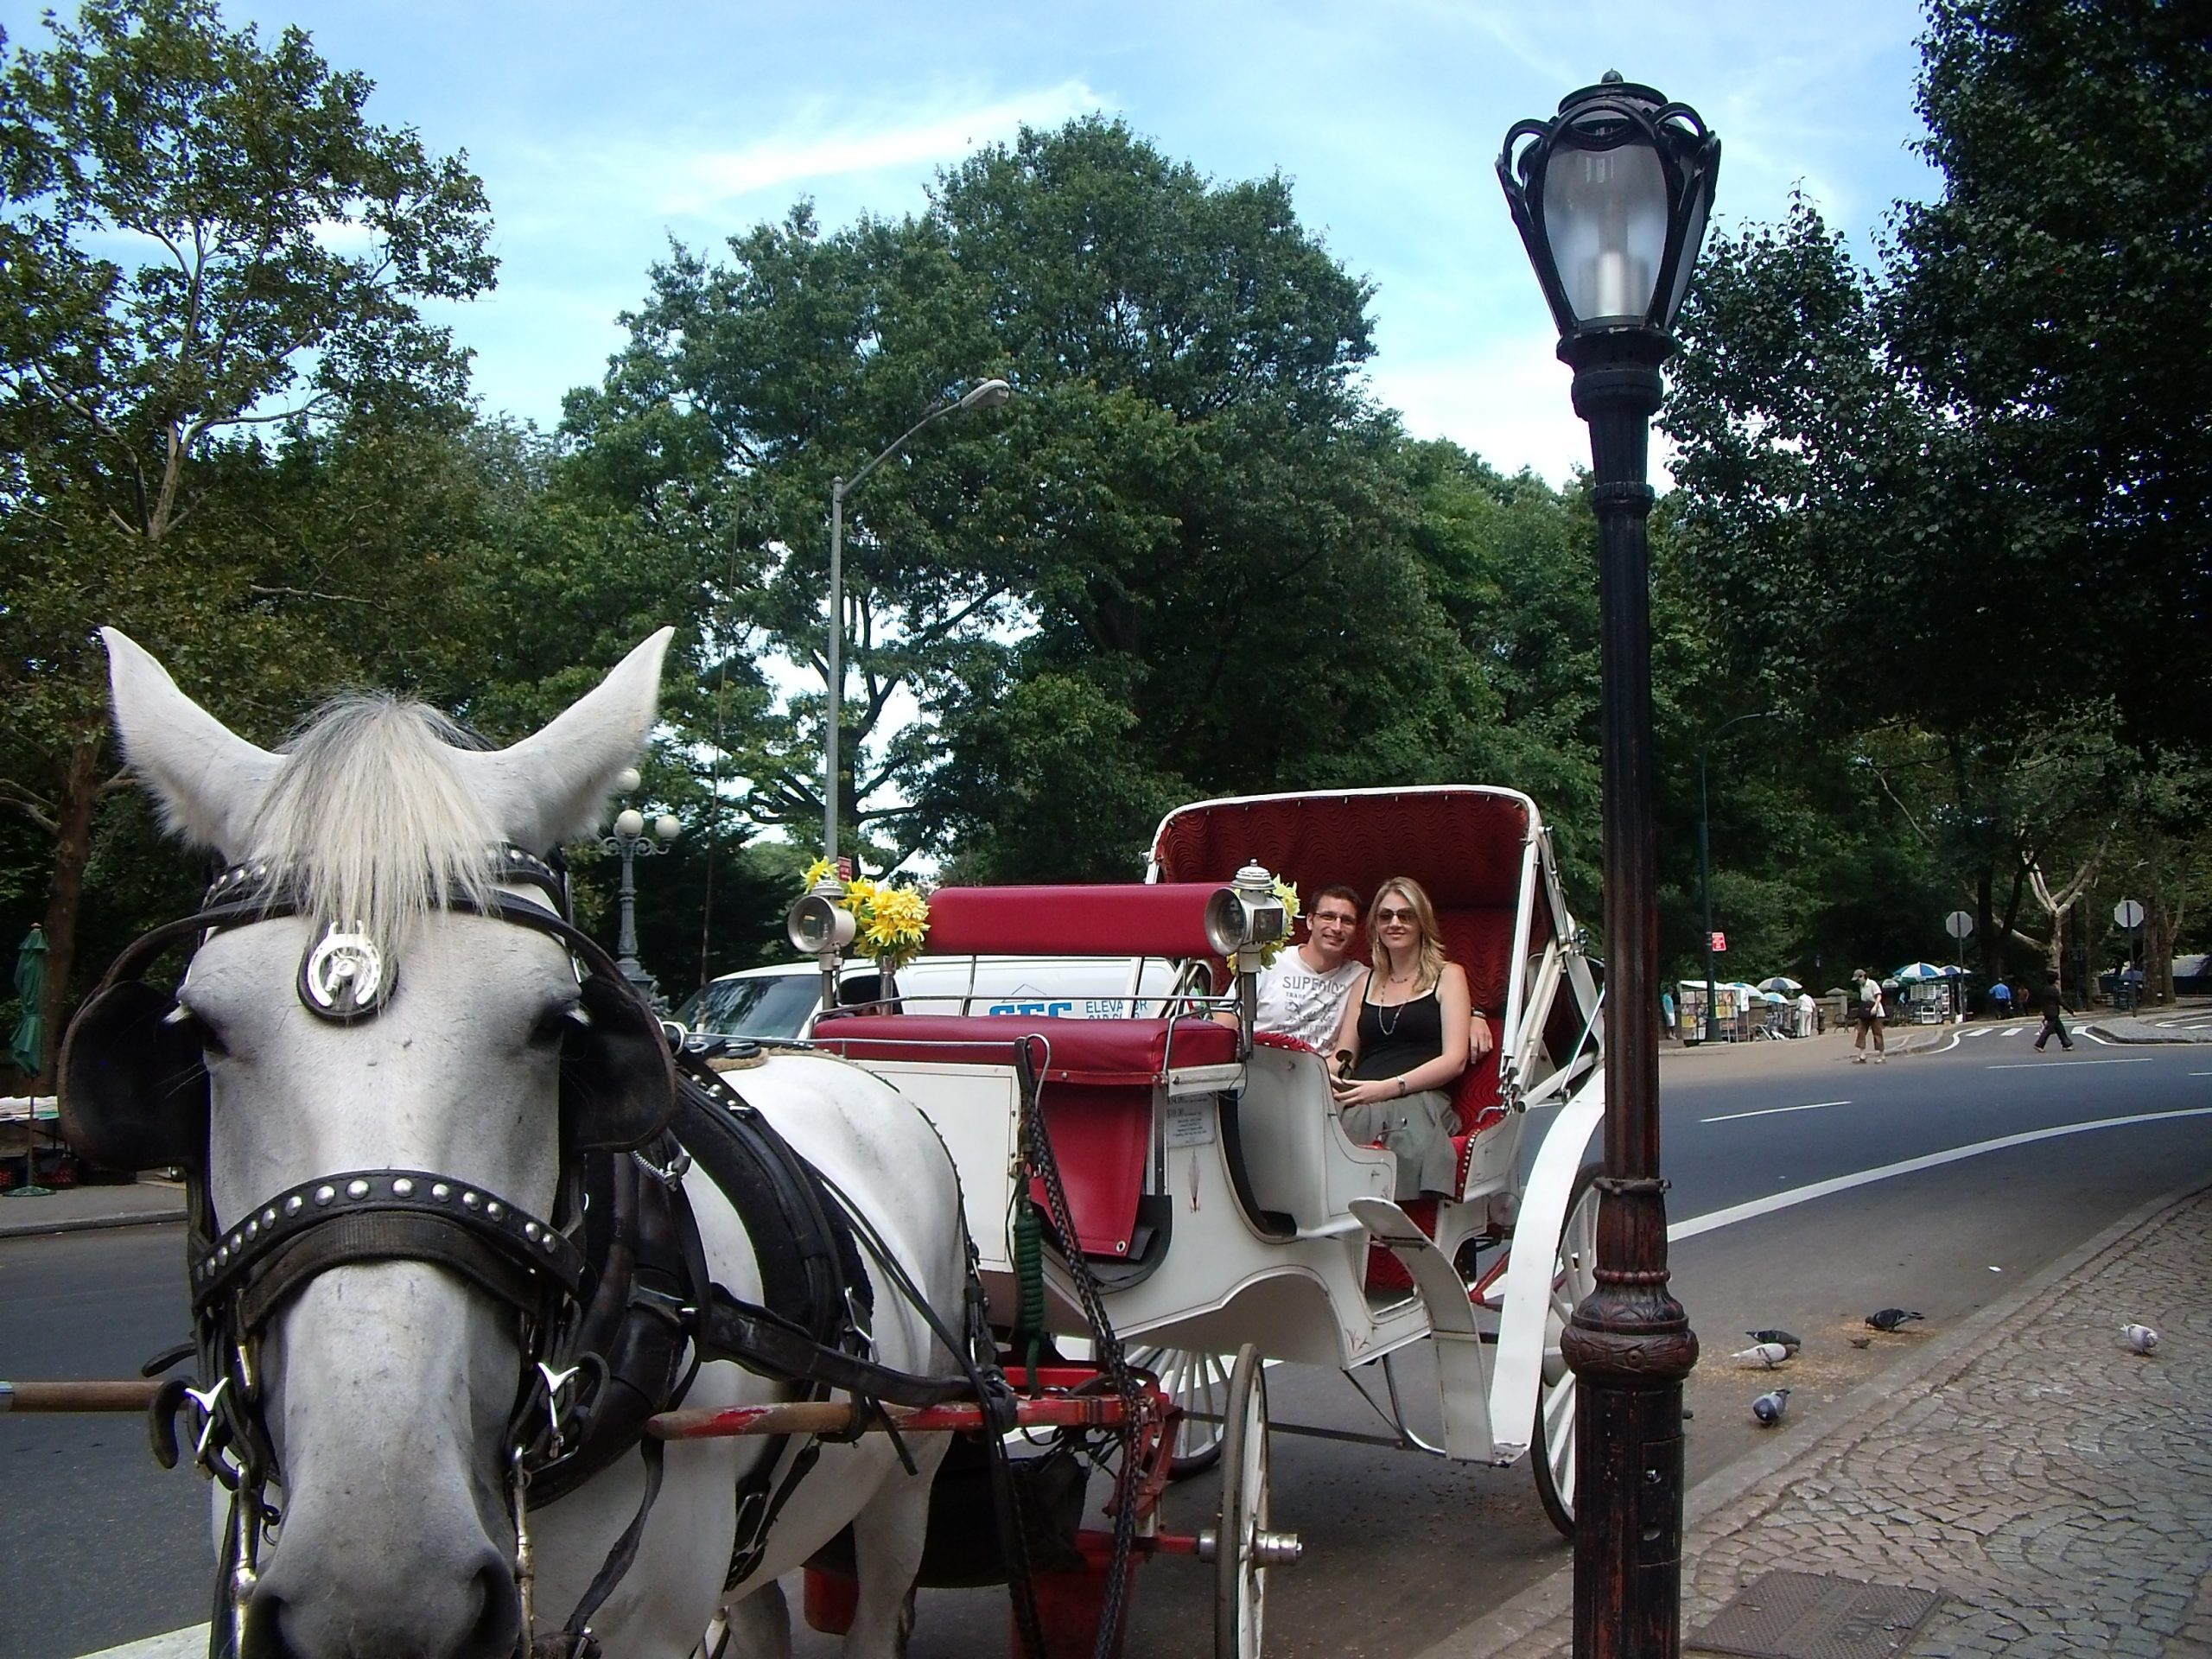 central park horse carriage ride new york city guide